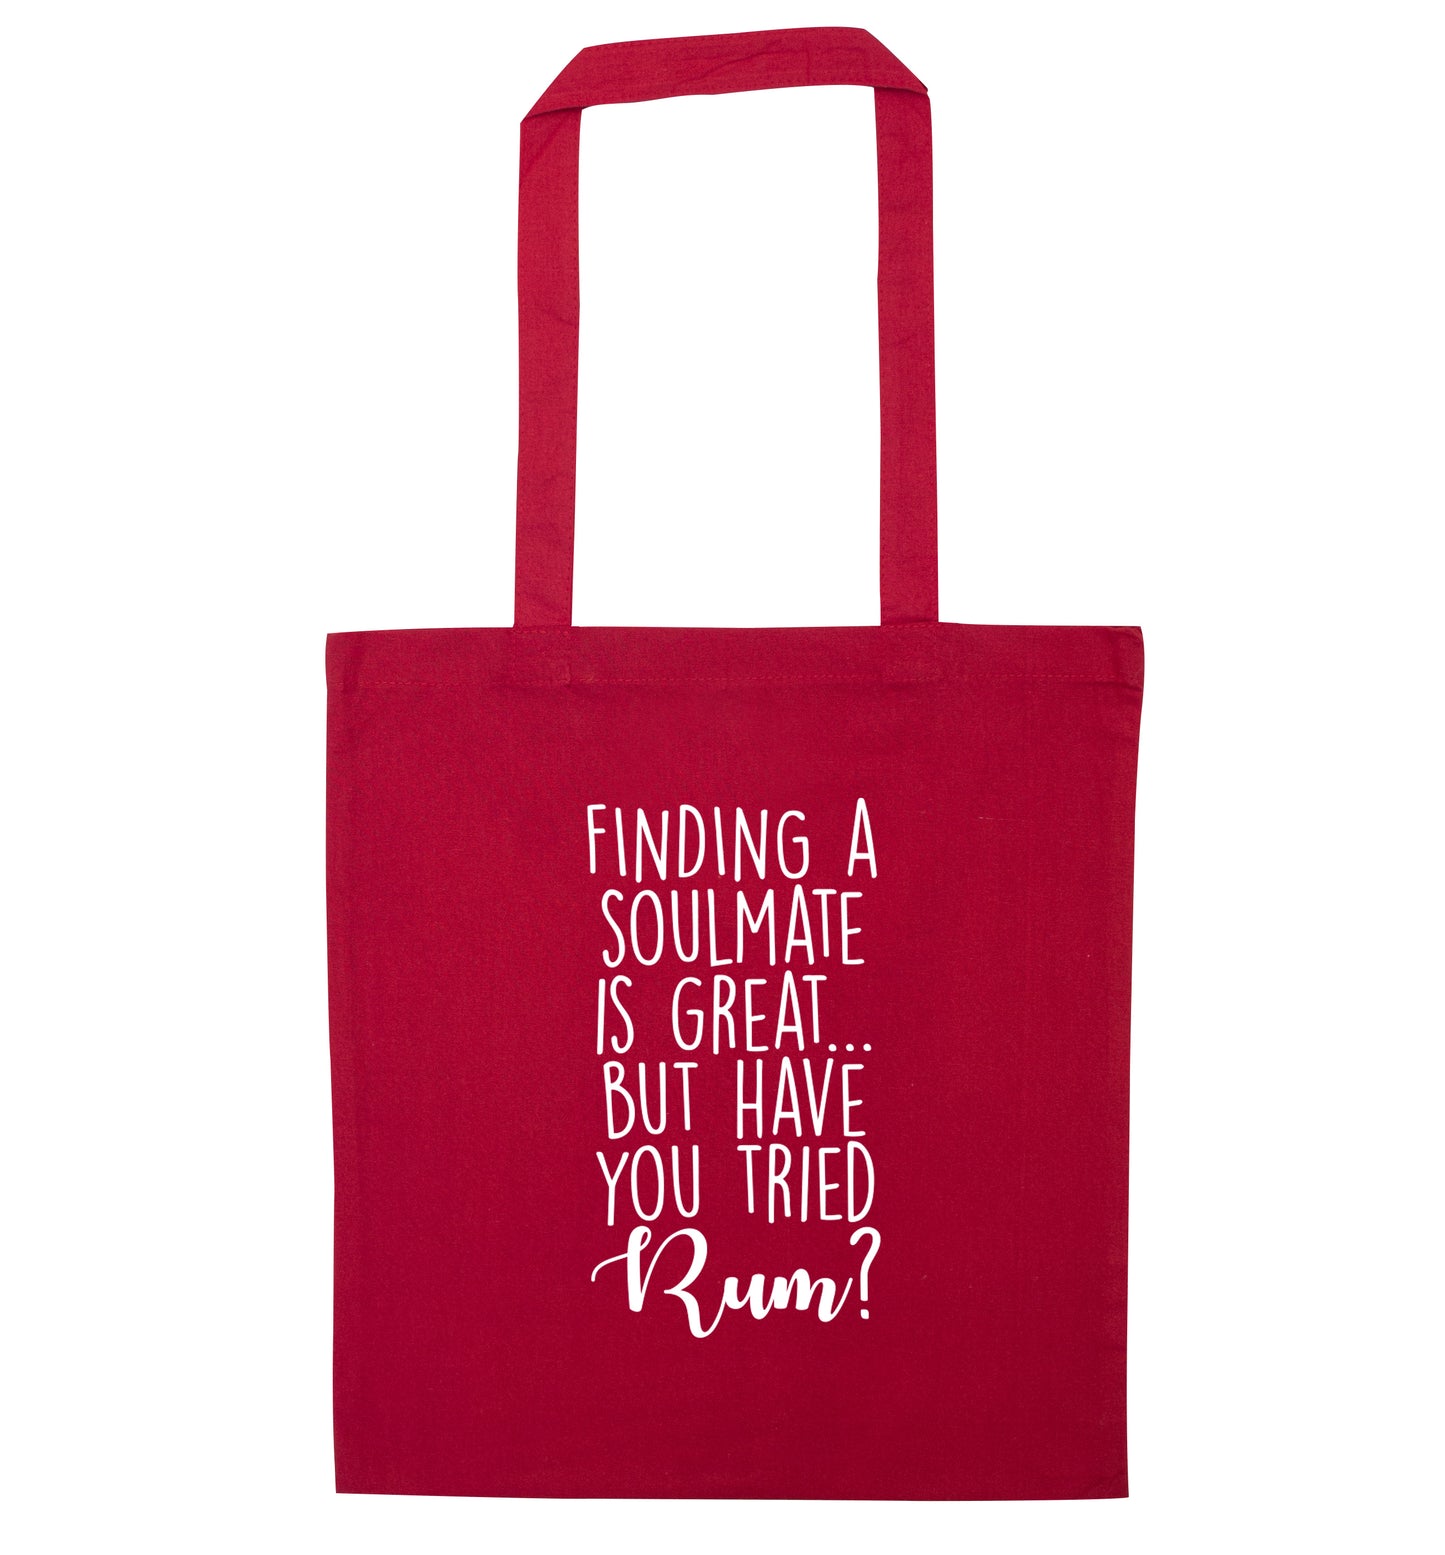 Finding a soulmate is great but have you tried rum? red tote bag